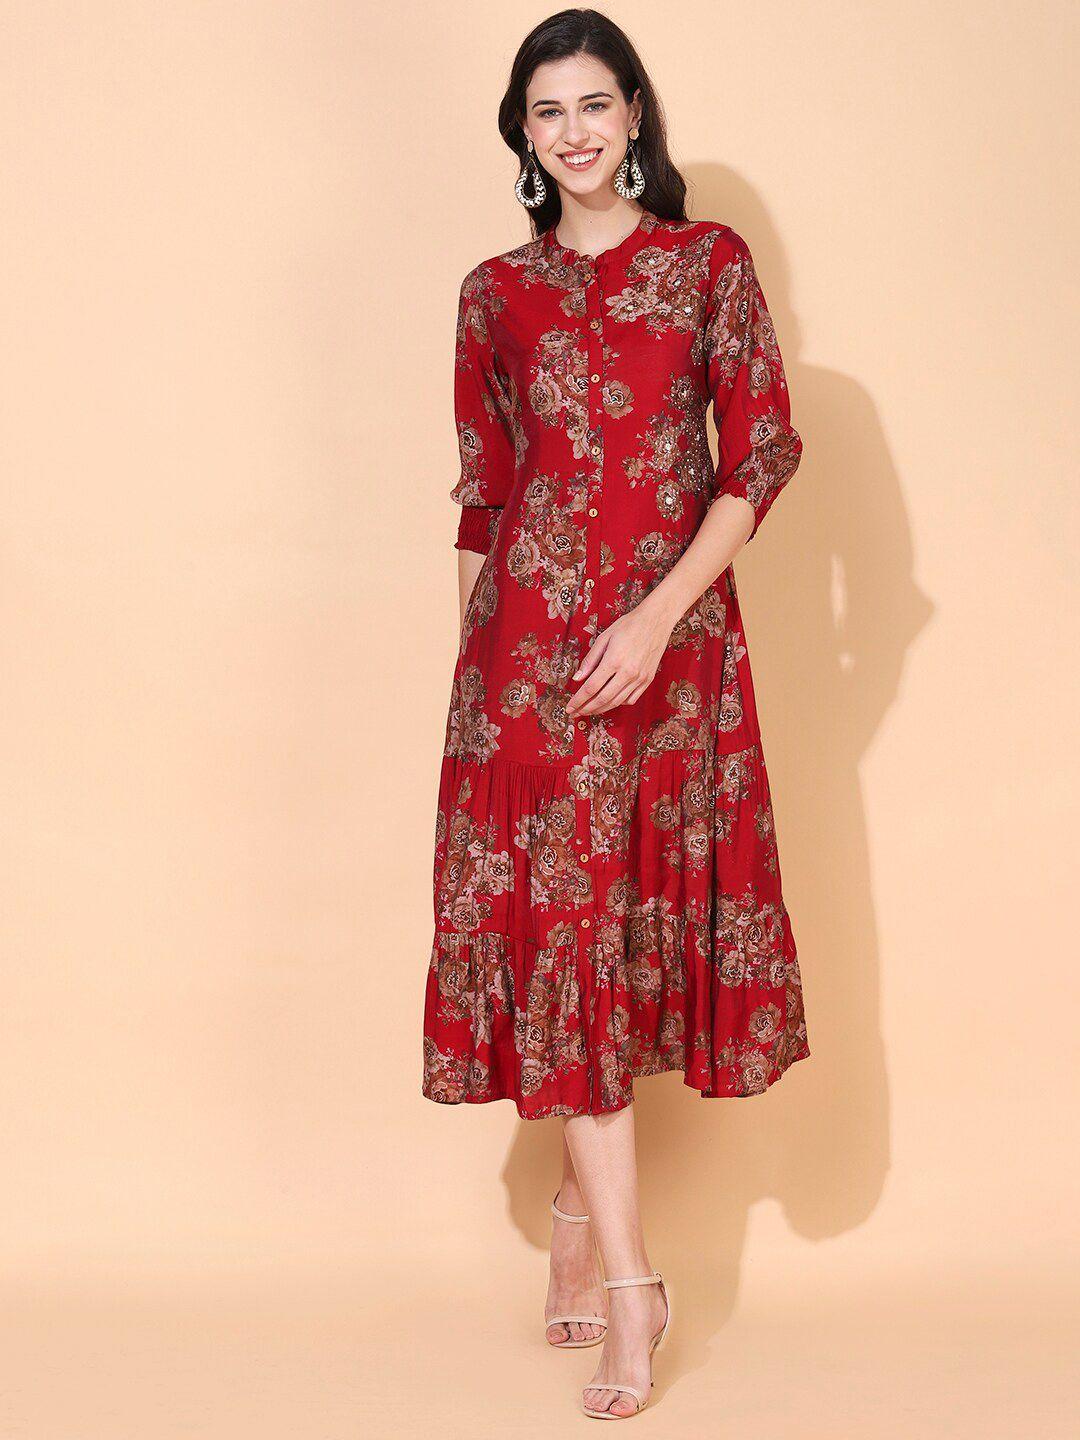 fashor-red-floral-a-line-midi-dress